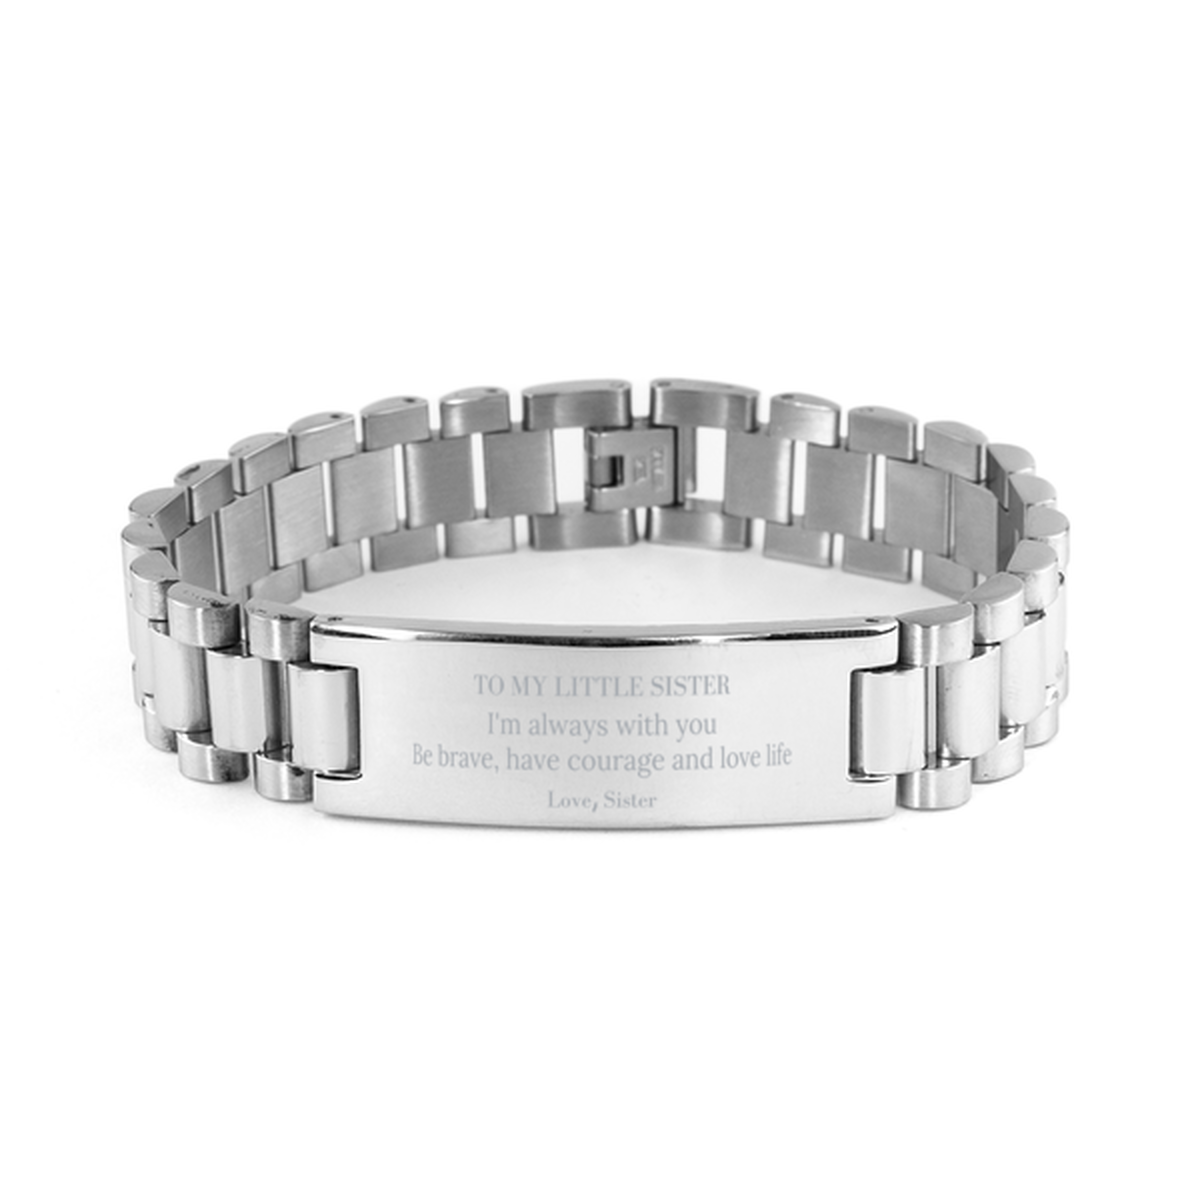 To My Little Sister Gifts from Sister, Unique Ladder Stainless Steel Bracelet Inspirational Christmas Birthday Graduation Gifts for Little Sister I'm always with you. Be brave, have courage and love life. Love, Sister